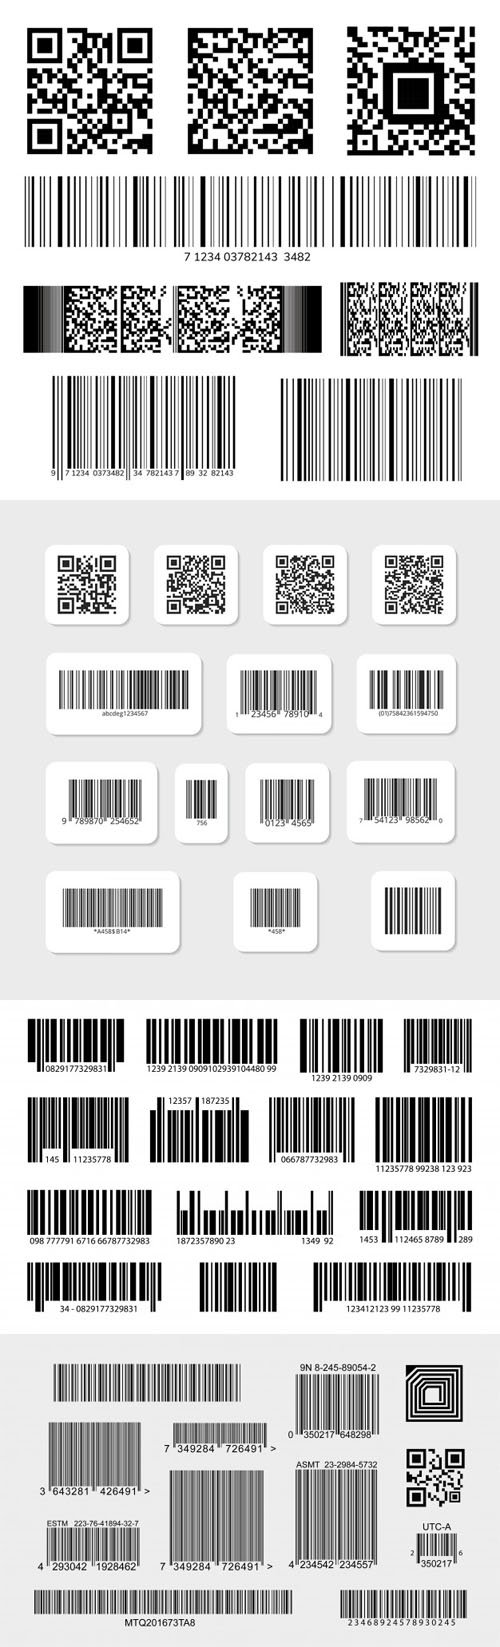 48 Various Digital Barcode Labels and Stickers Vector Templates